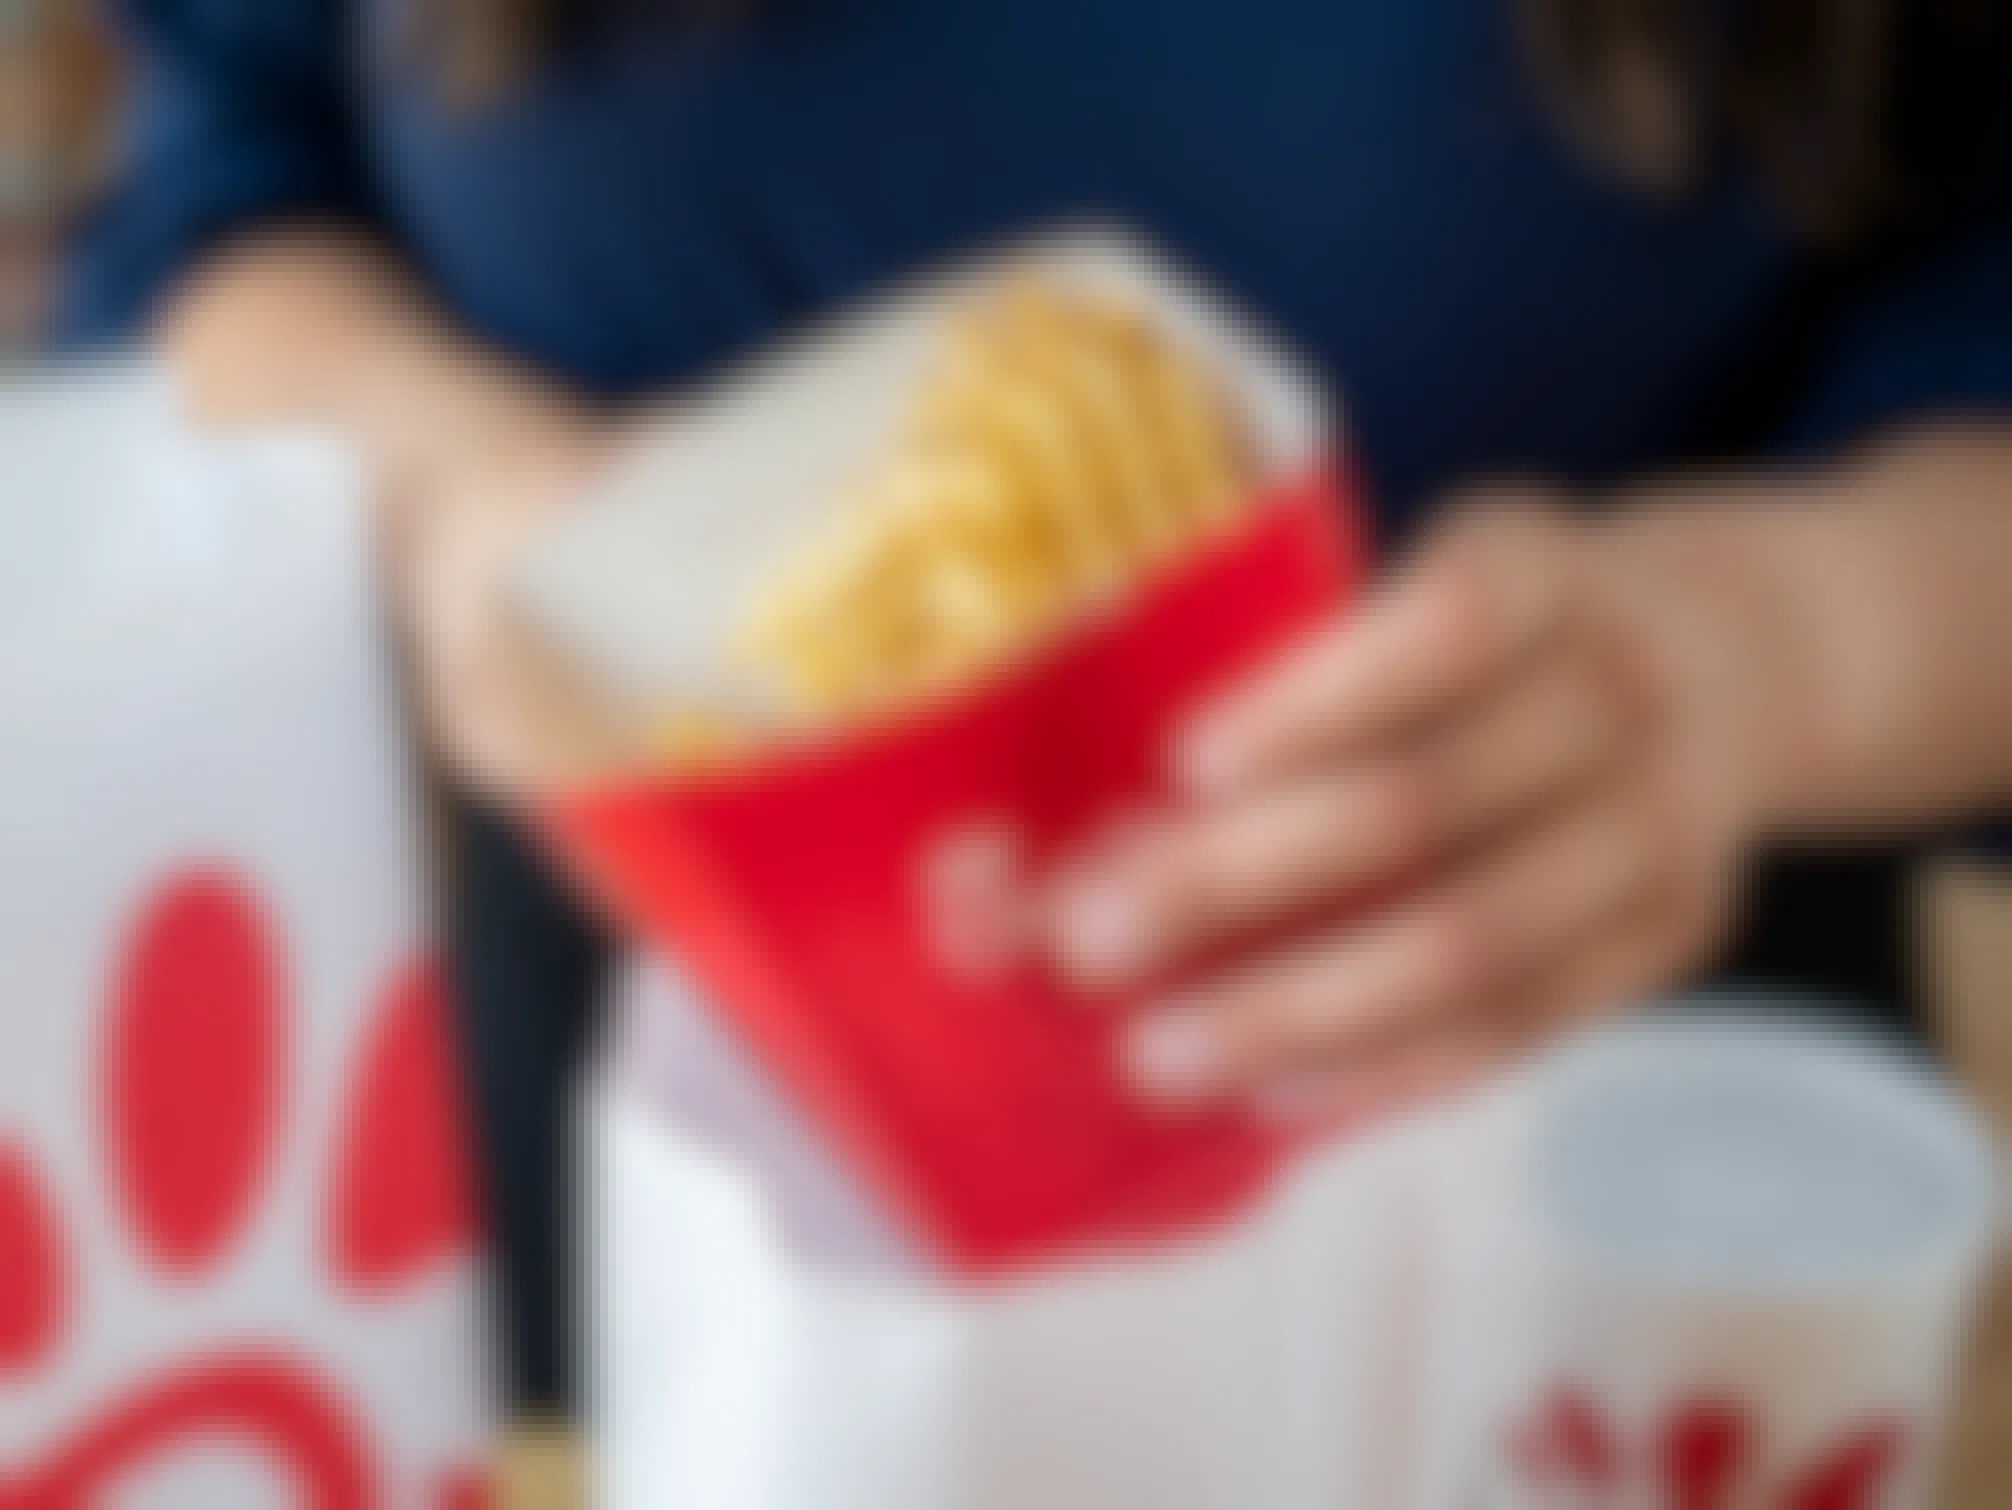 A person's hand taking a box of Chick-fil-A waffle fries out of a Chick-fil-A takeout bag sitting on a table next to another Chick-fil-A takeout bag and a fountain drink cup.